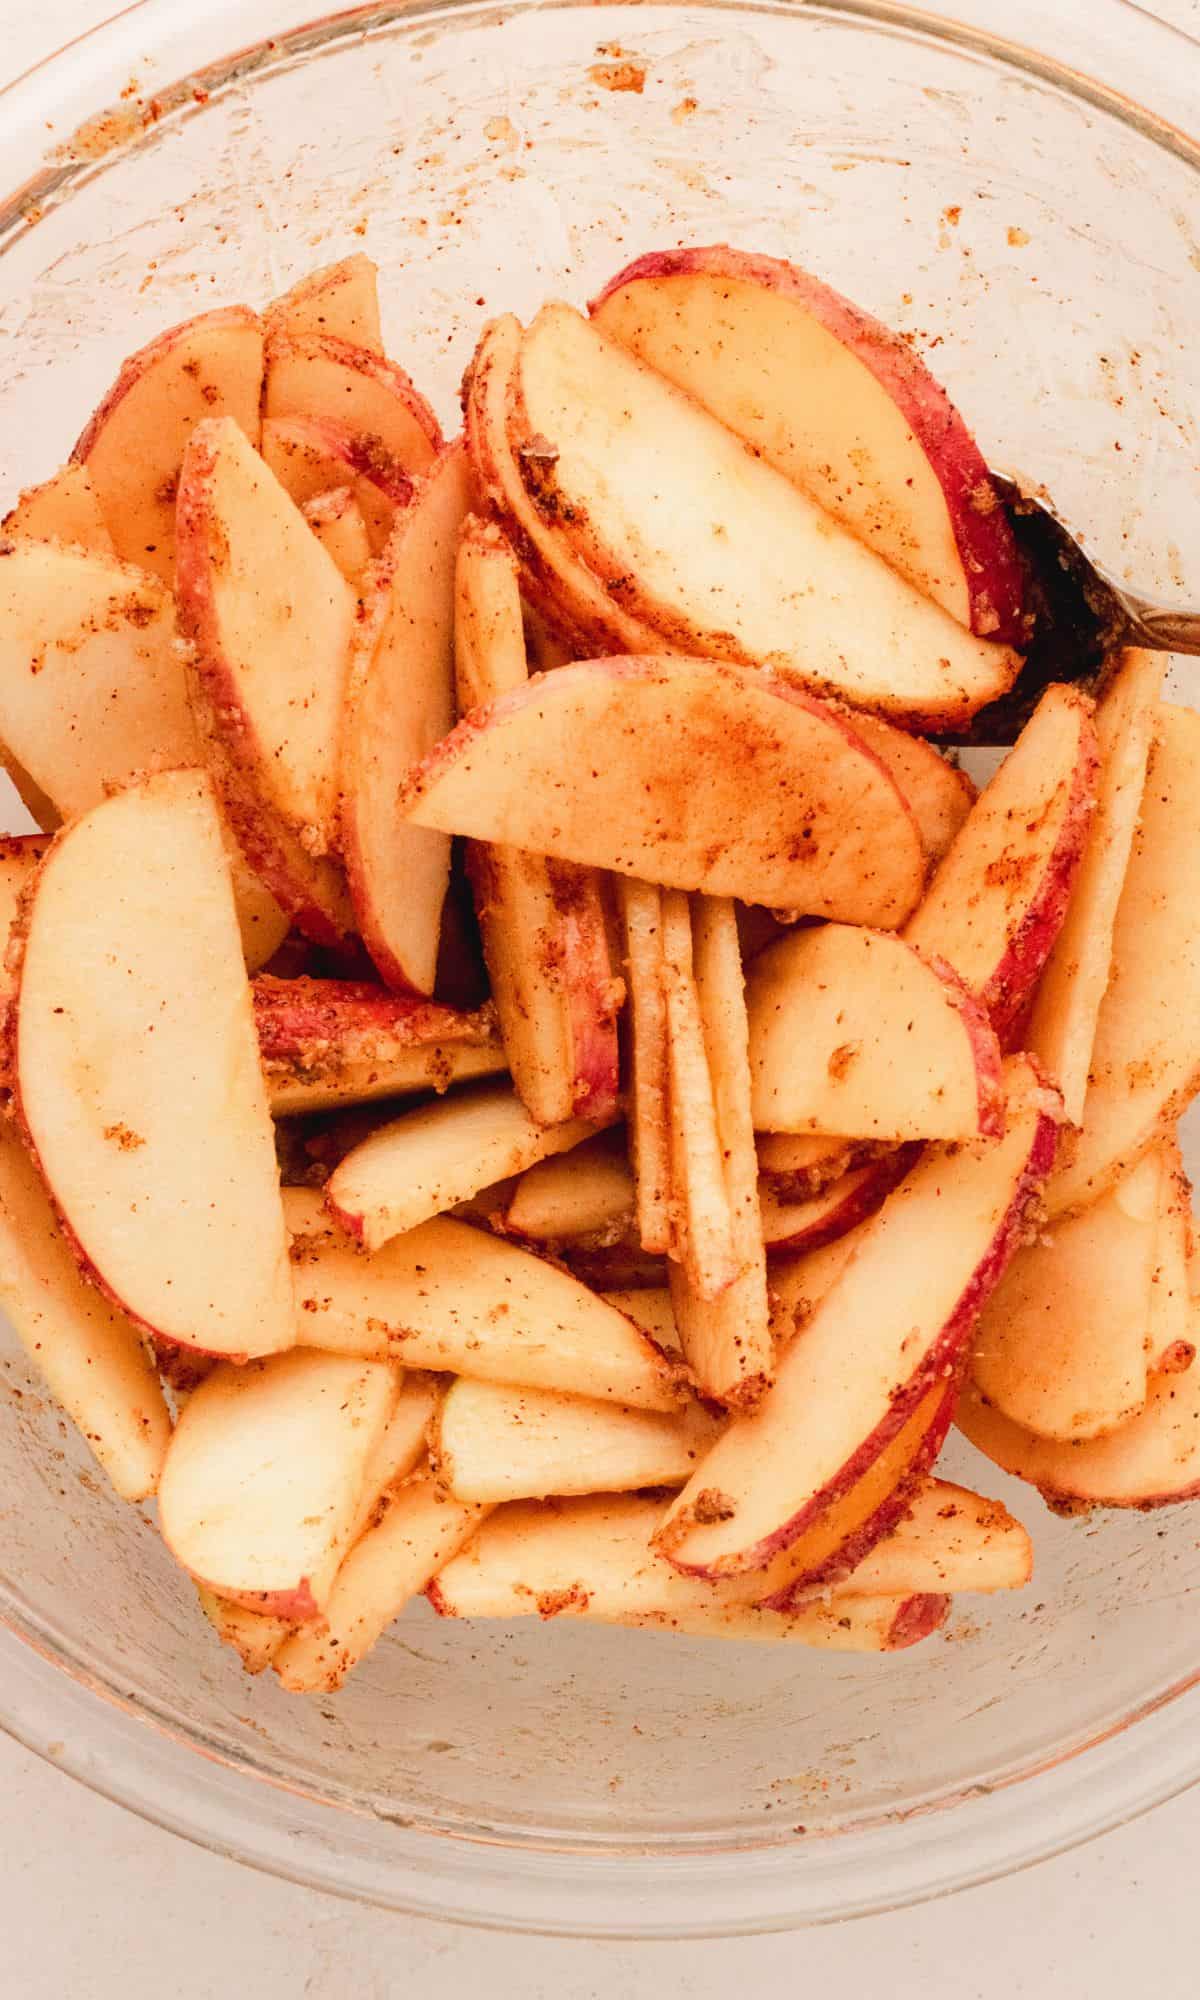 Apple preparation for roasted apple and chicken panini.